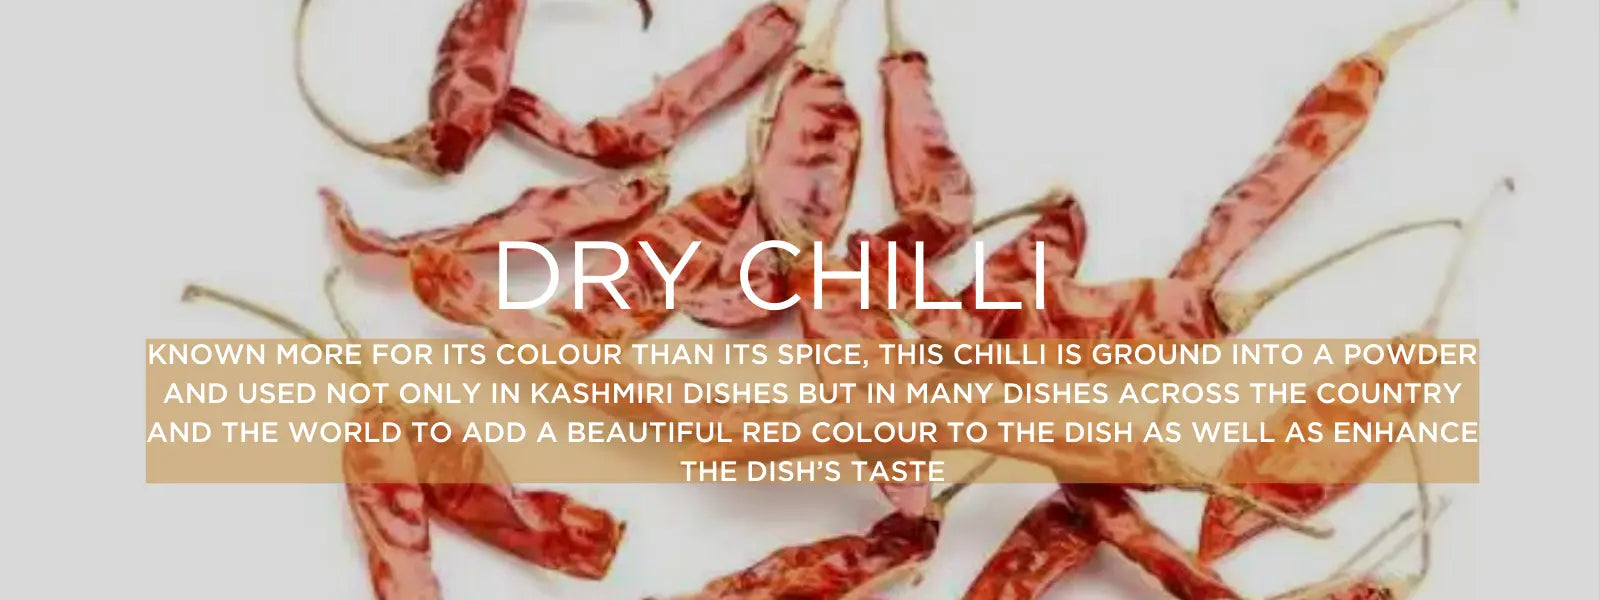 Dry chilli- Health Benefits, Uses and Important Facts